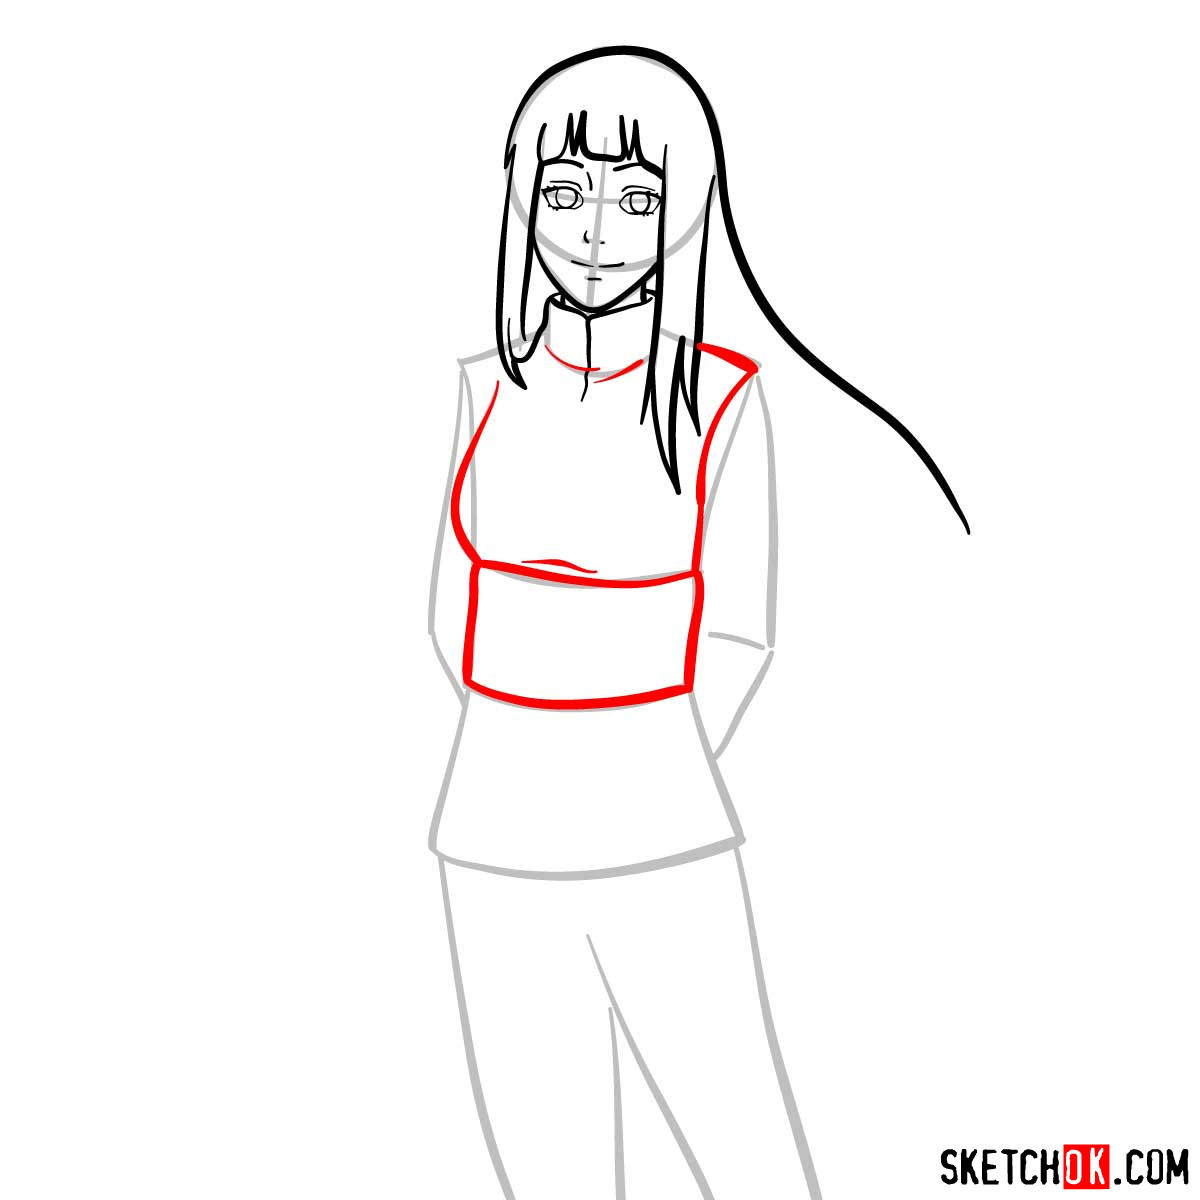 How to draw Hinata from Naruto anime - step 06